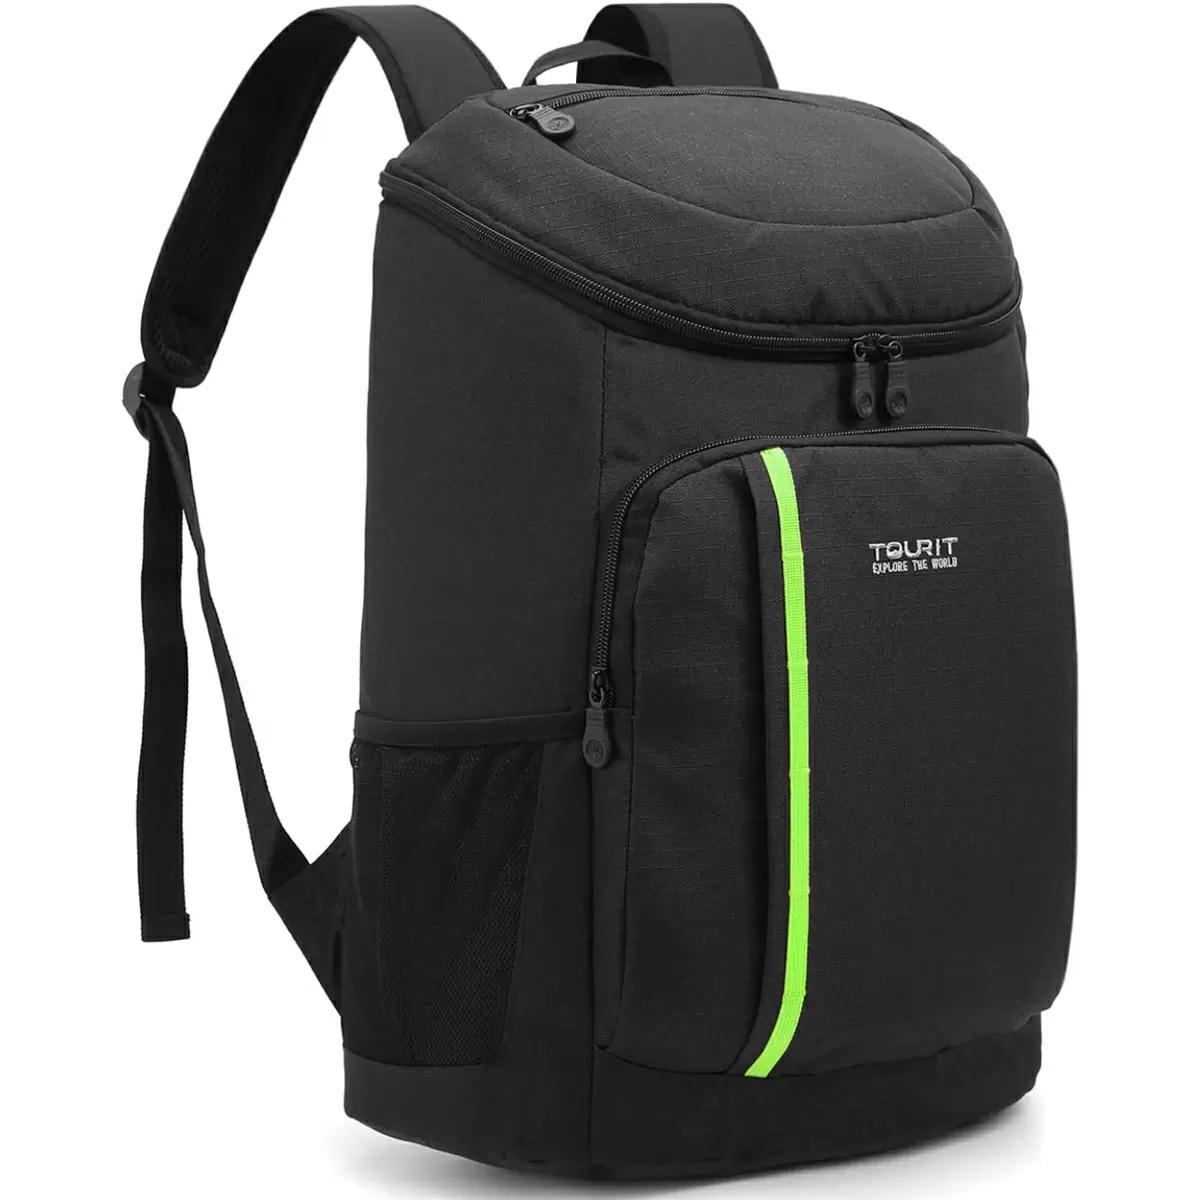 Tourit Cooler Backpack 30 Cans Insulated Backpack Cooler for $29.04 Shipped